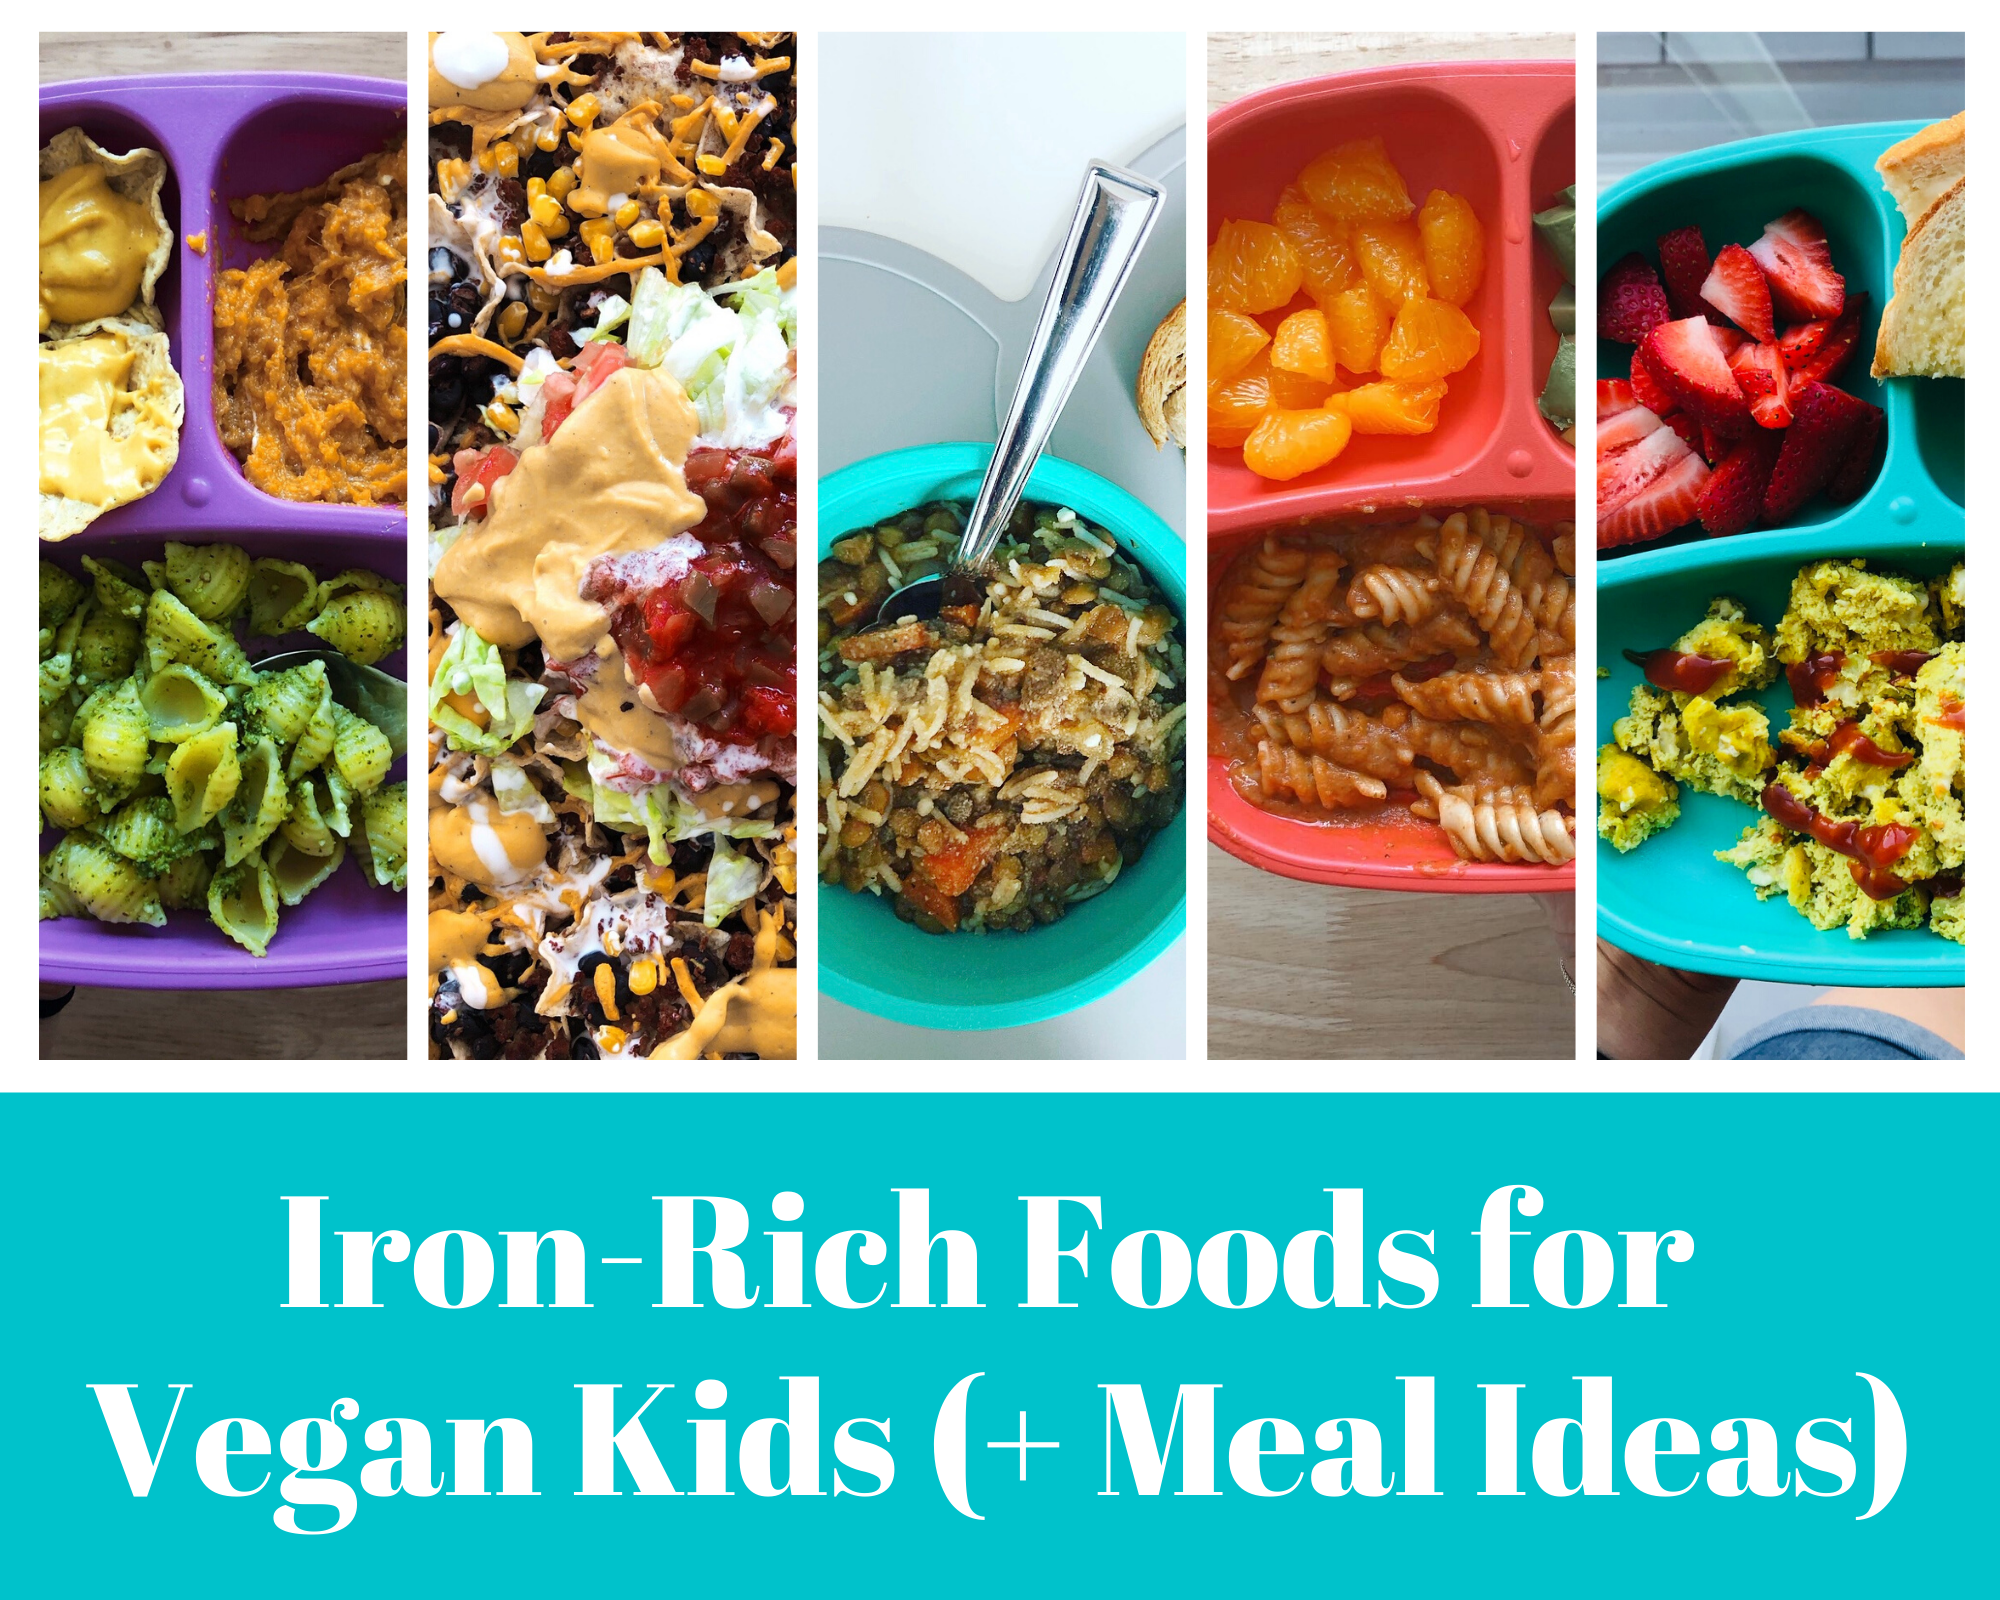 Iron-Rich Foods for Vegan Kids (+ Meal Ideas)